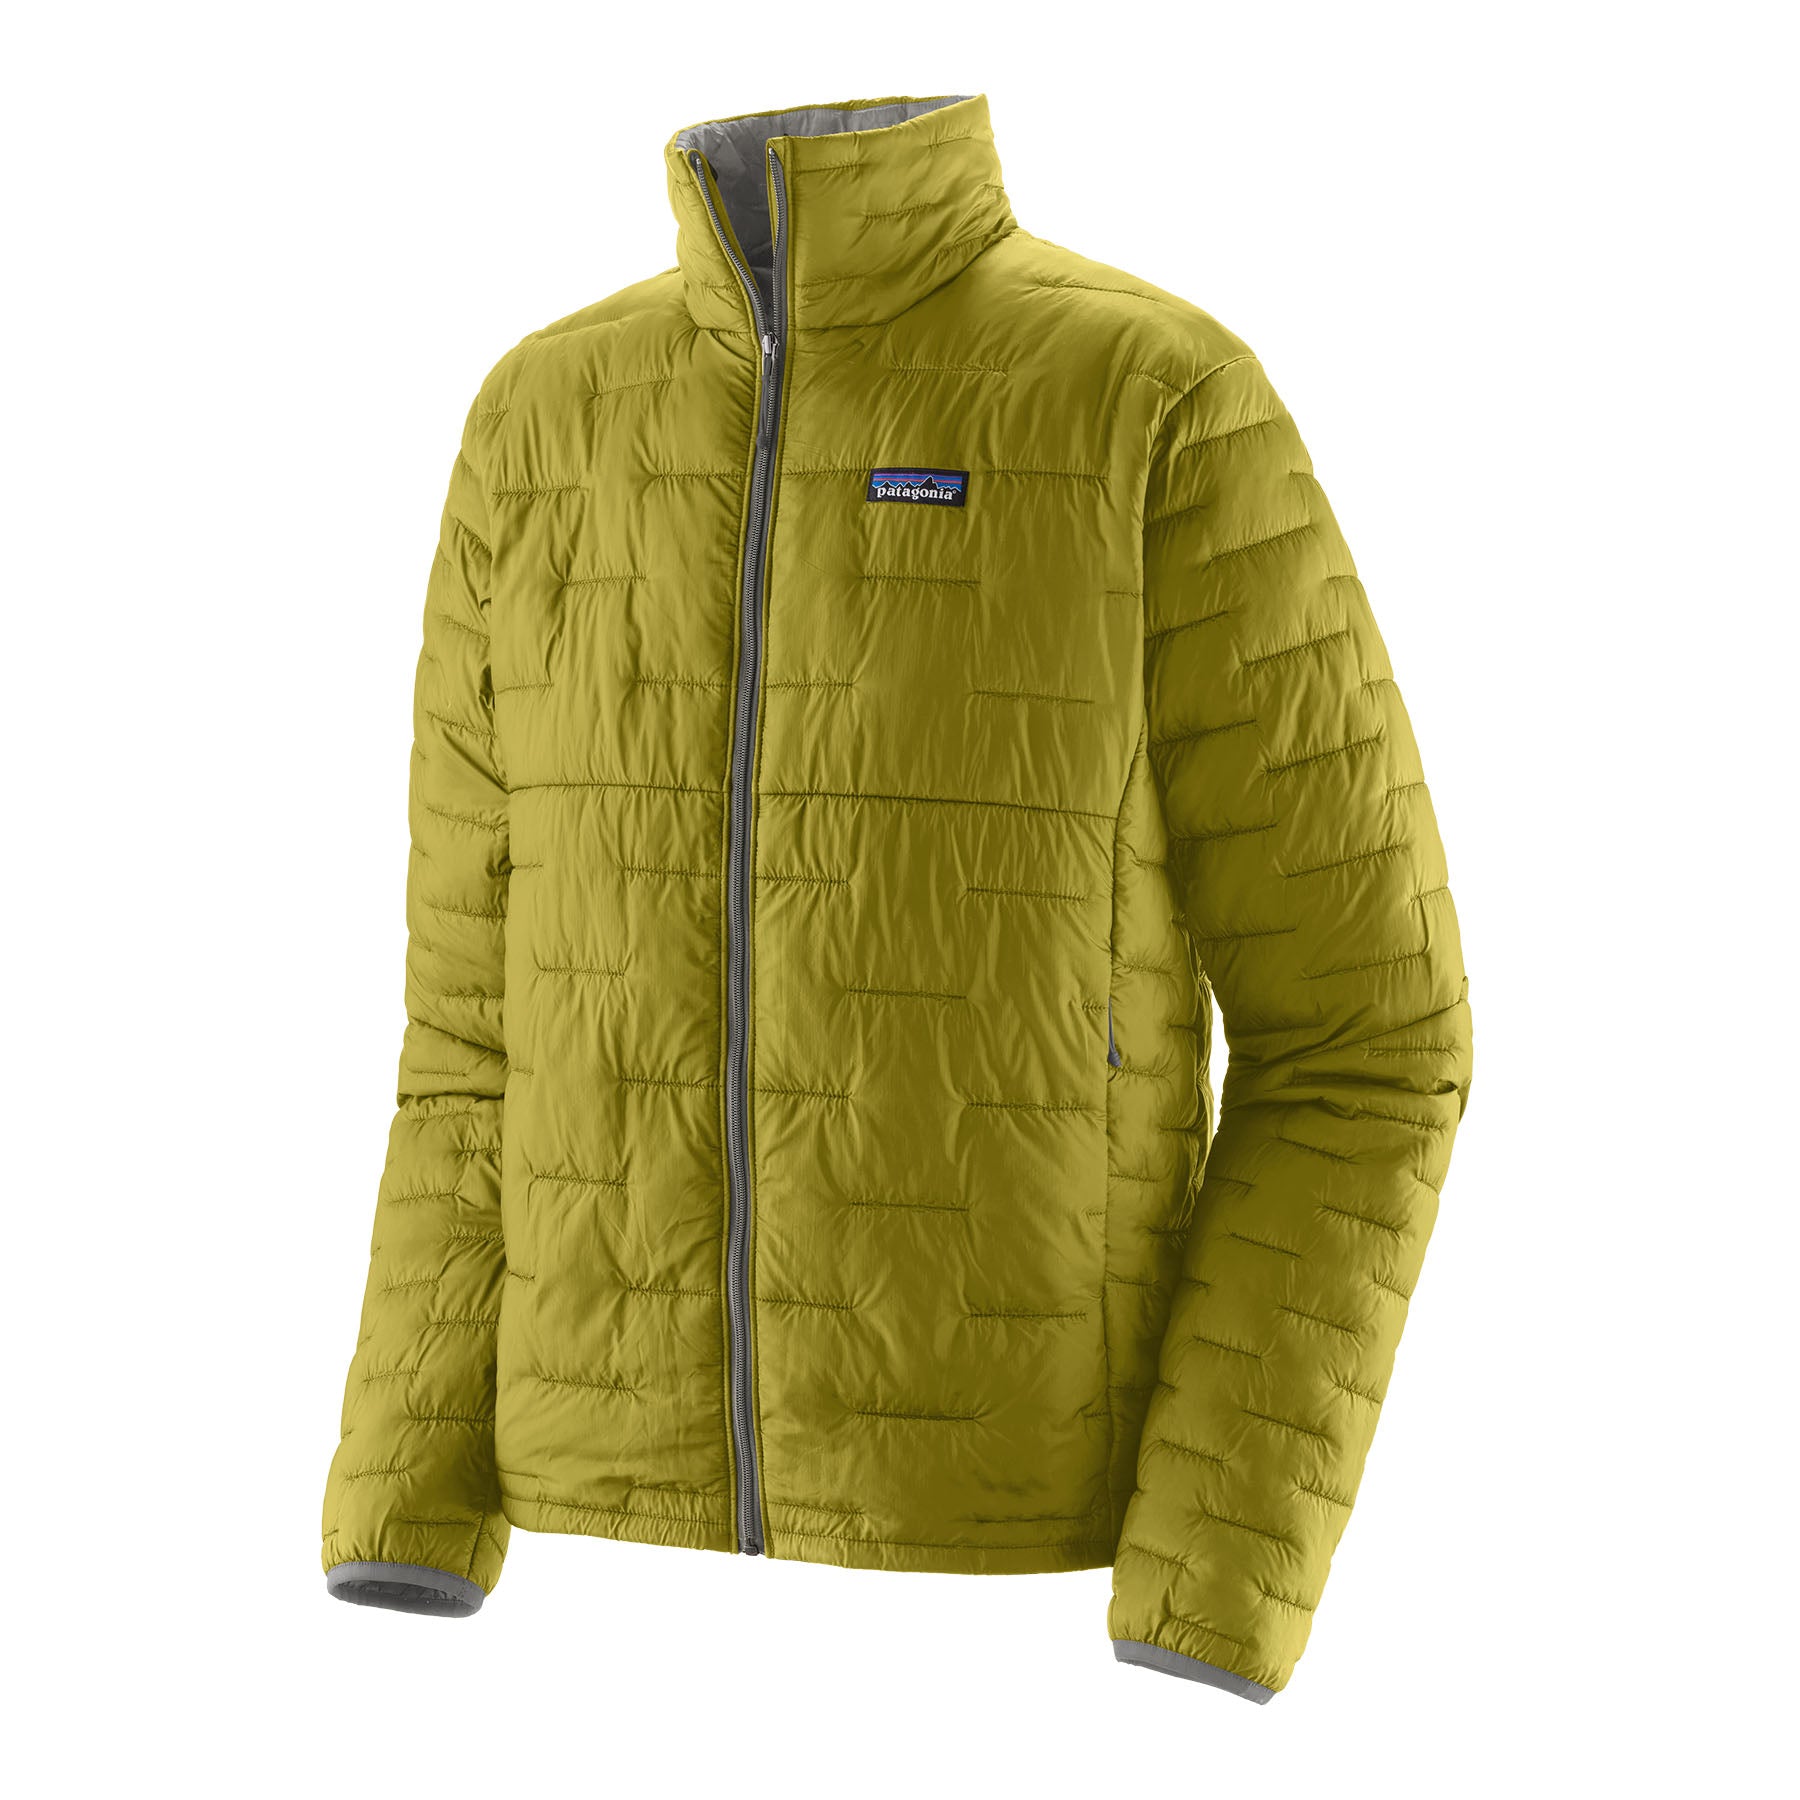 Patagonia Micro Puff vs. Nano Puff: Which Insulated Jacket Is Better?